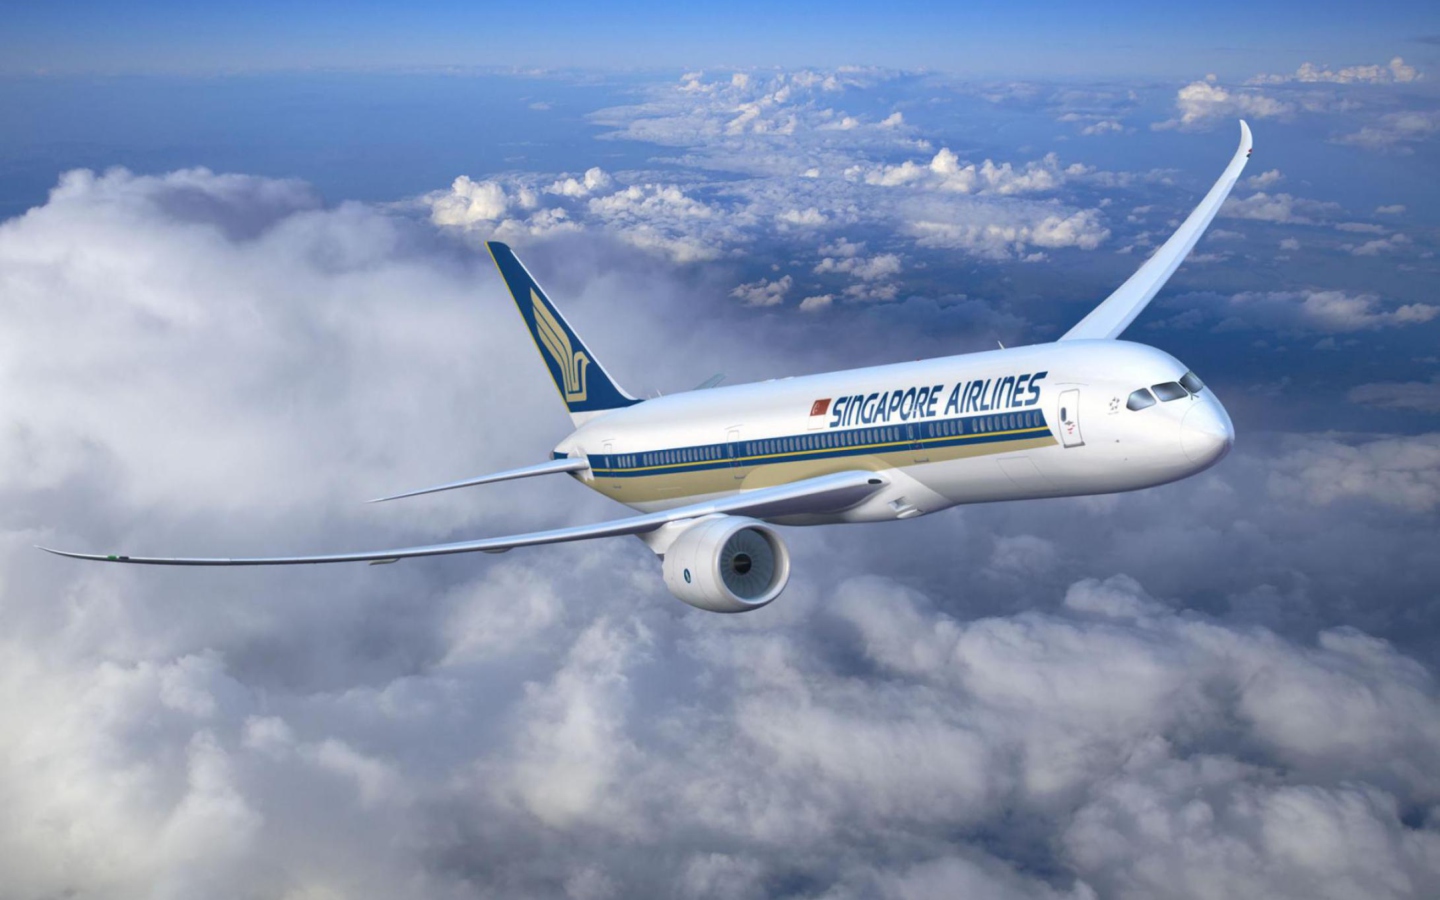 Singapore Airlines wallpaper 1440x900